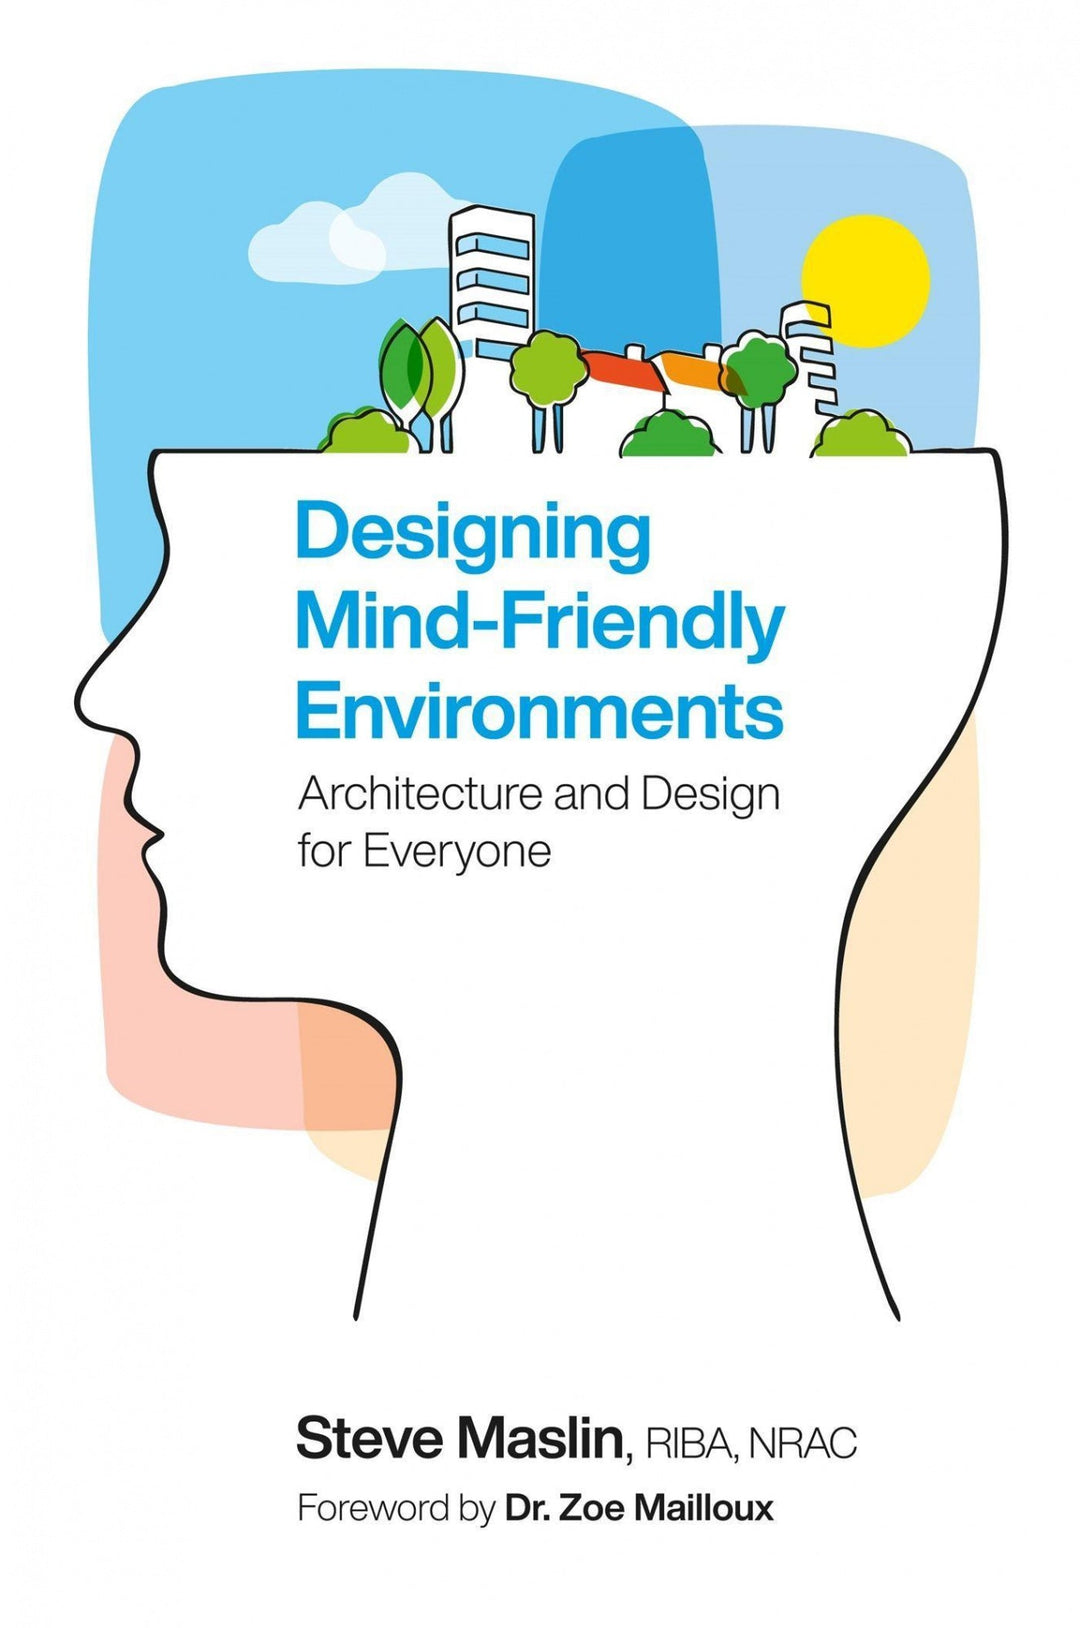 Designing Mind-Friendly Environments Book - Architecture & Design For Everyone - #HolaNanu#NDIS #creativekids